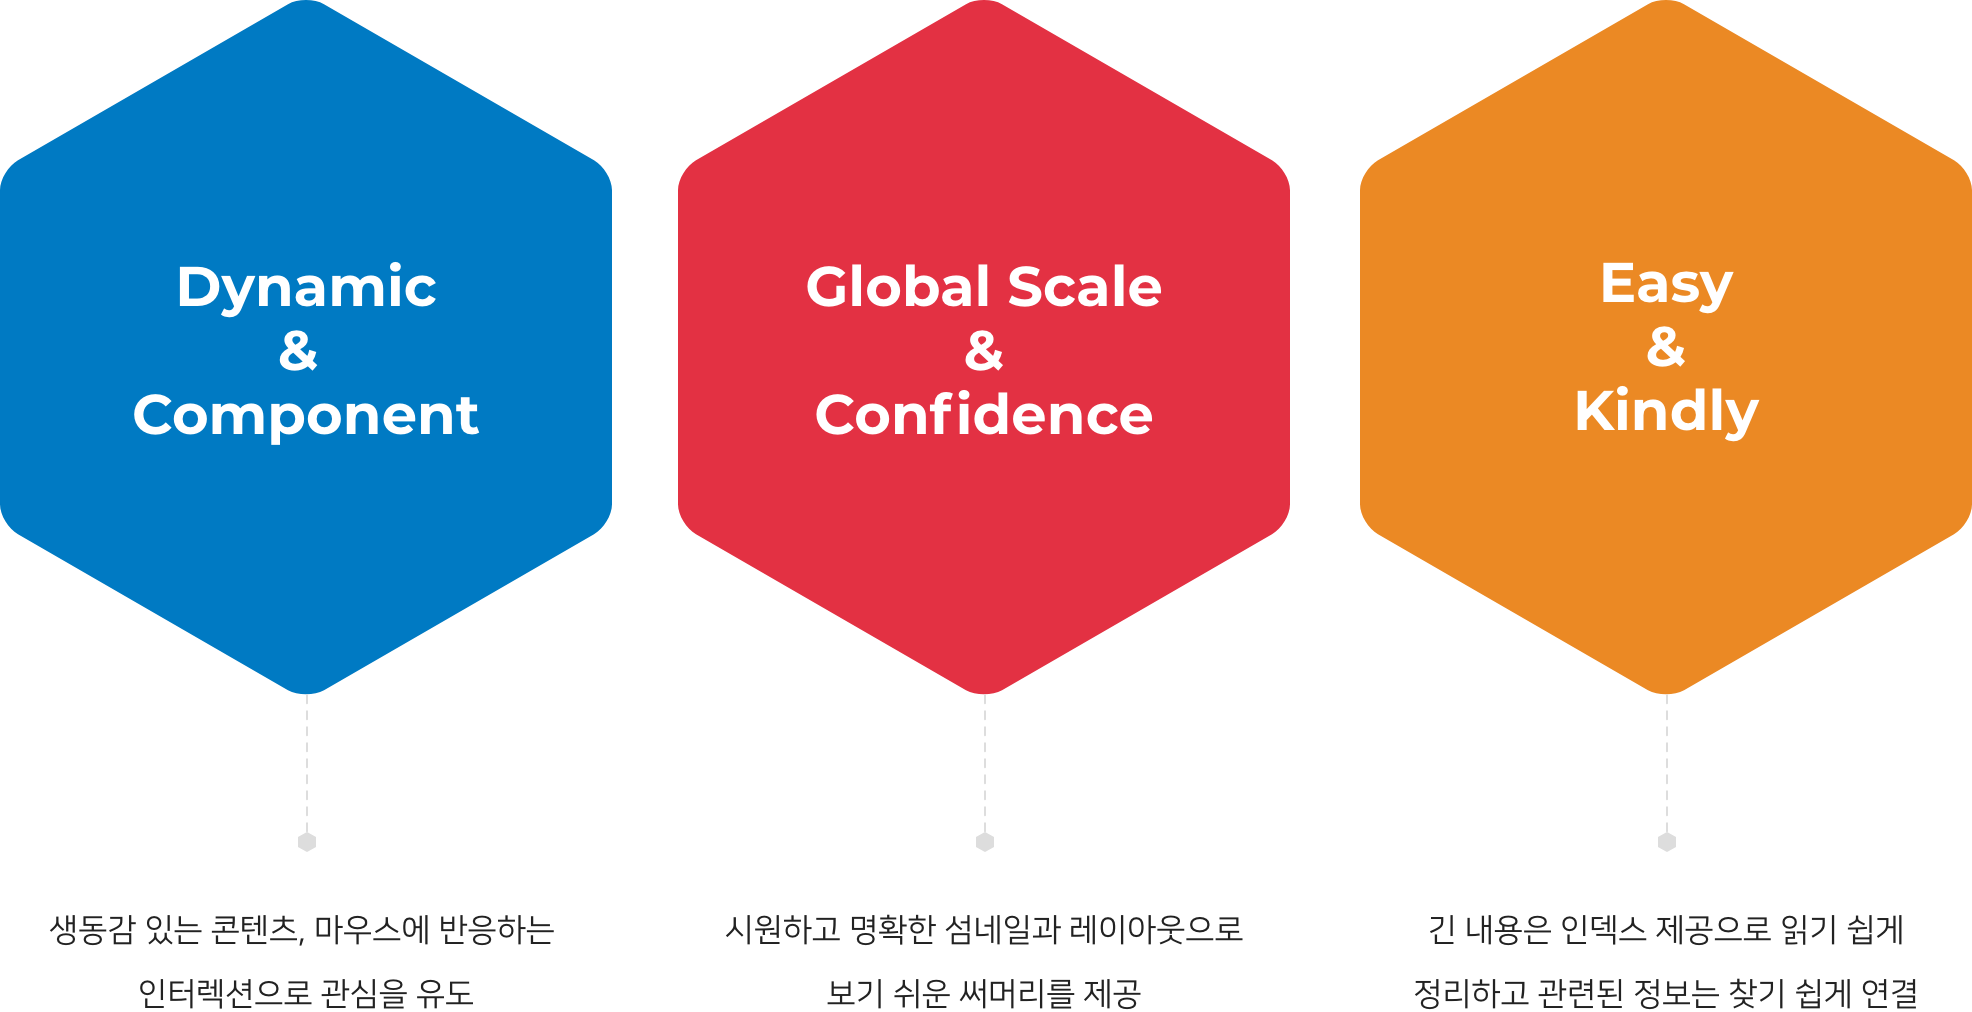 UX 콘셉 Dynamic & Compnent, Global Scale & Confidence, Easy & Kindly